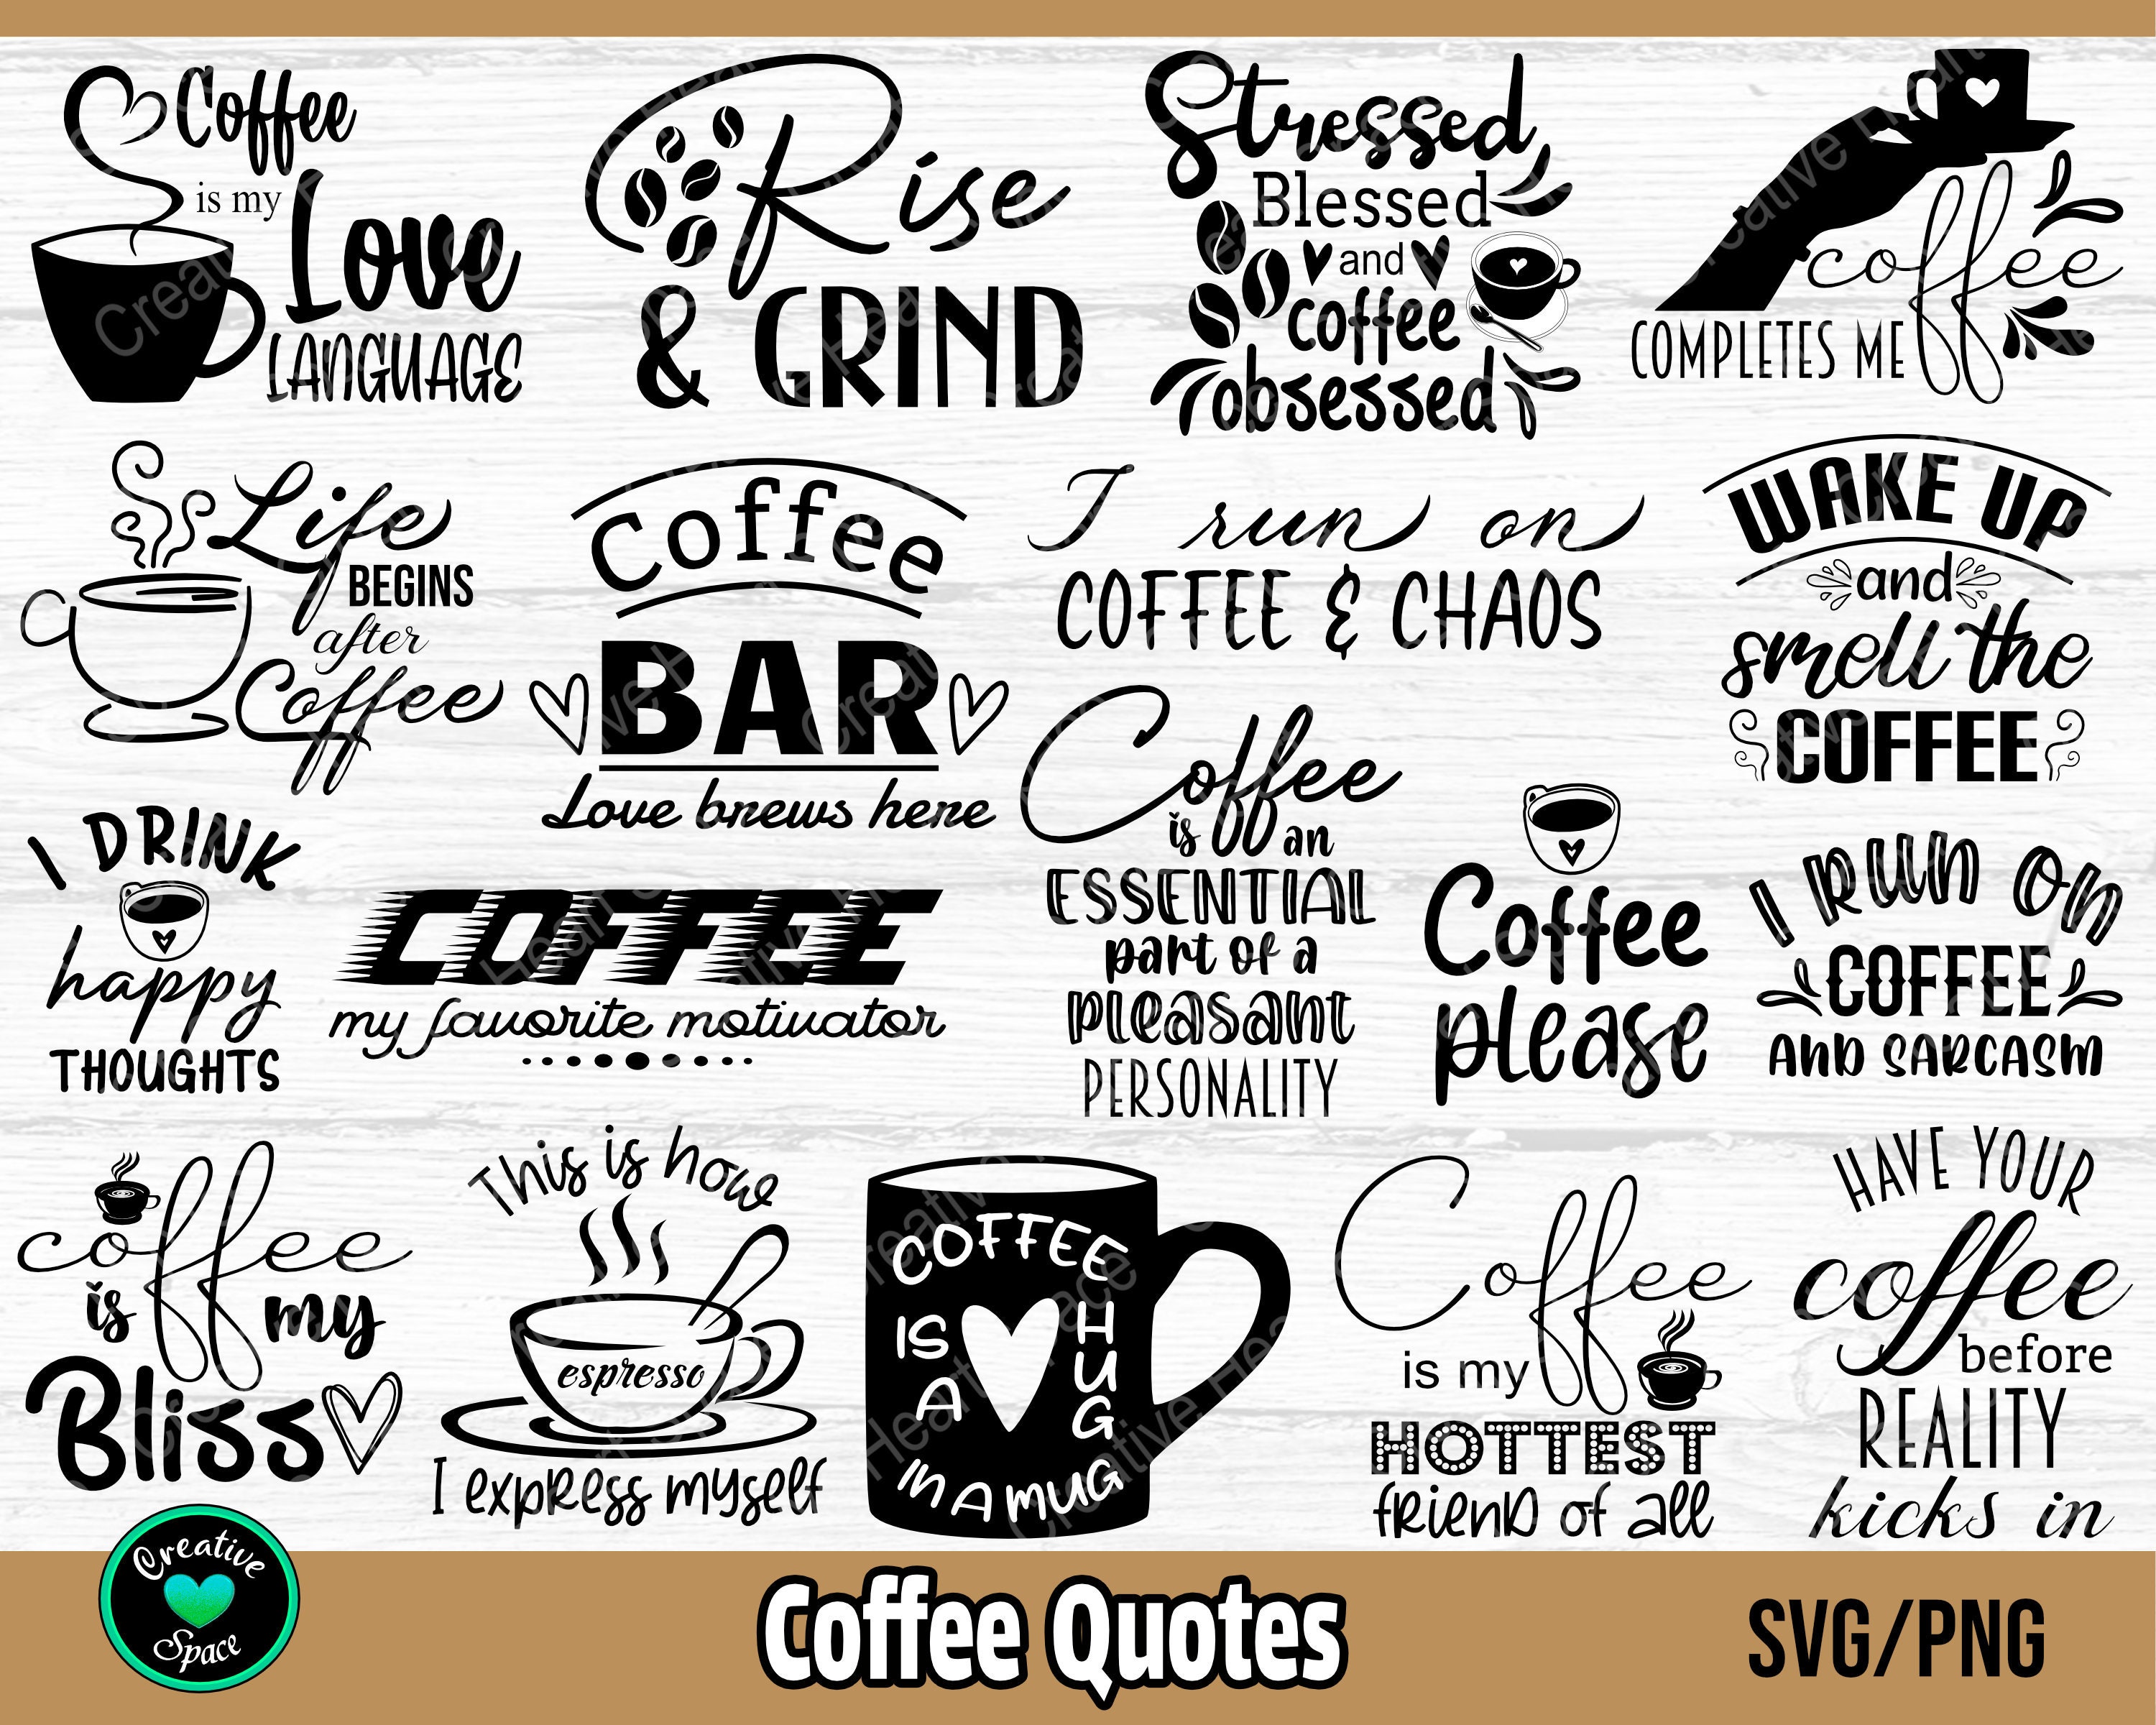 Famous Coffee Quotes And Sayings